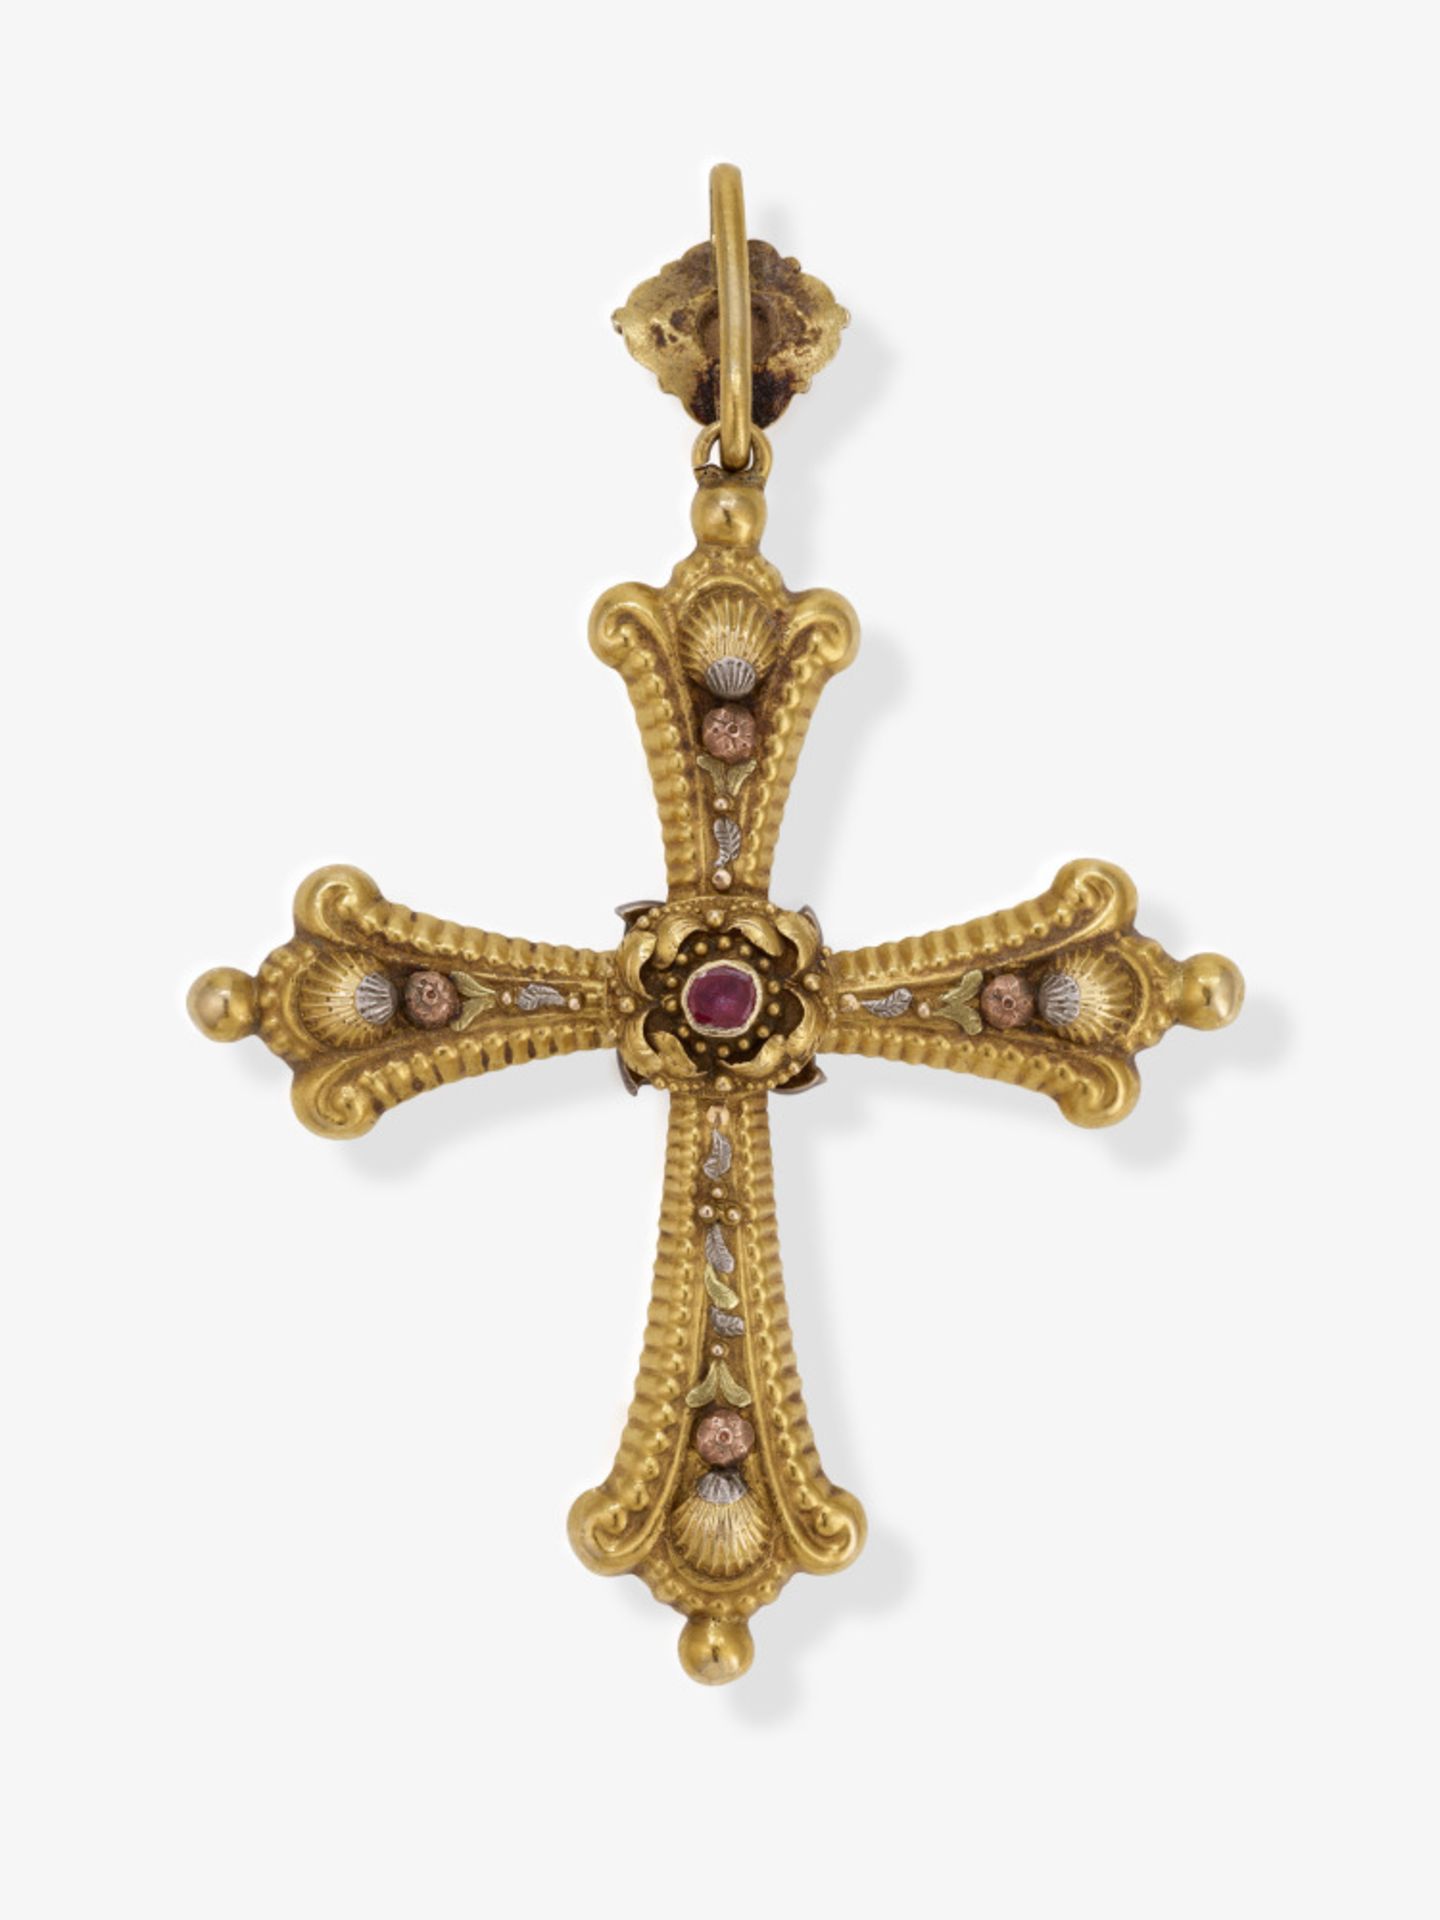 A cross pendant with diamonds and a ruby - France, circa 1830-1840 - Image 2 of 3